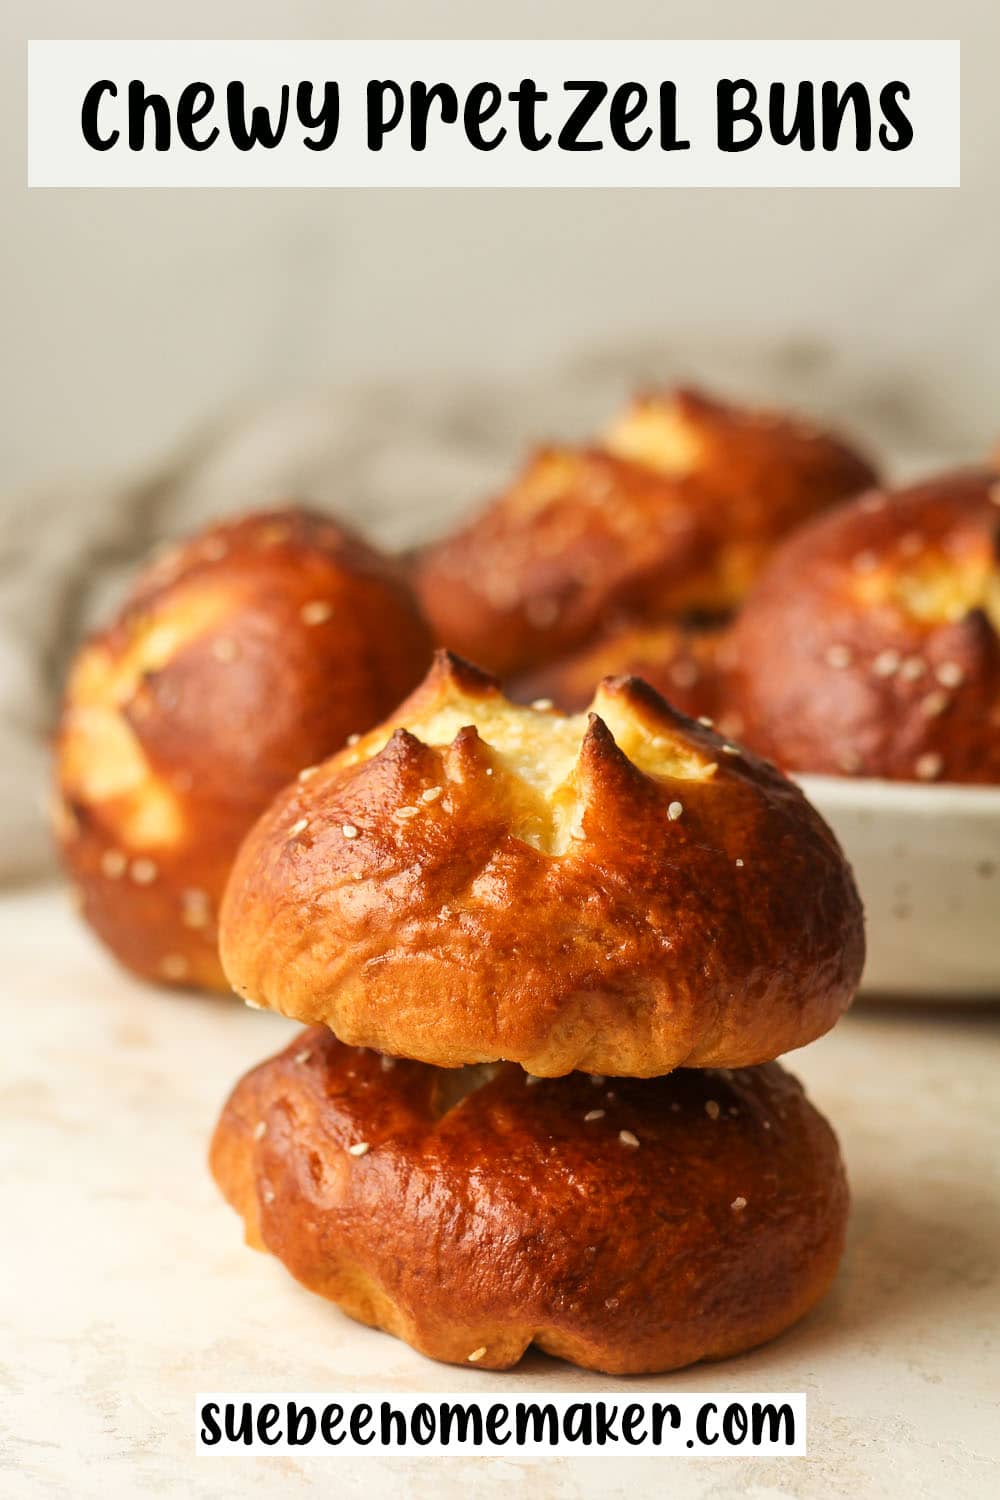 A stack of two chewy pretzel buns.